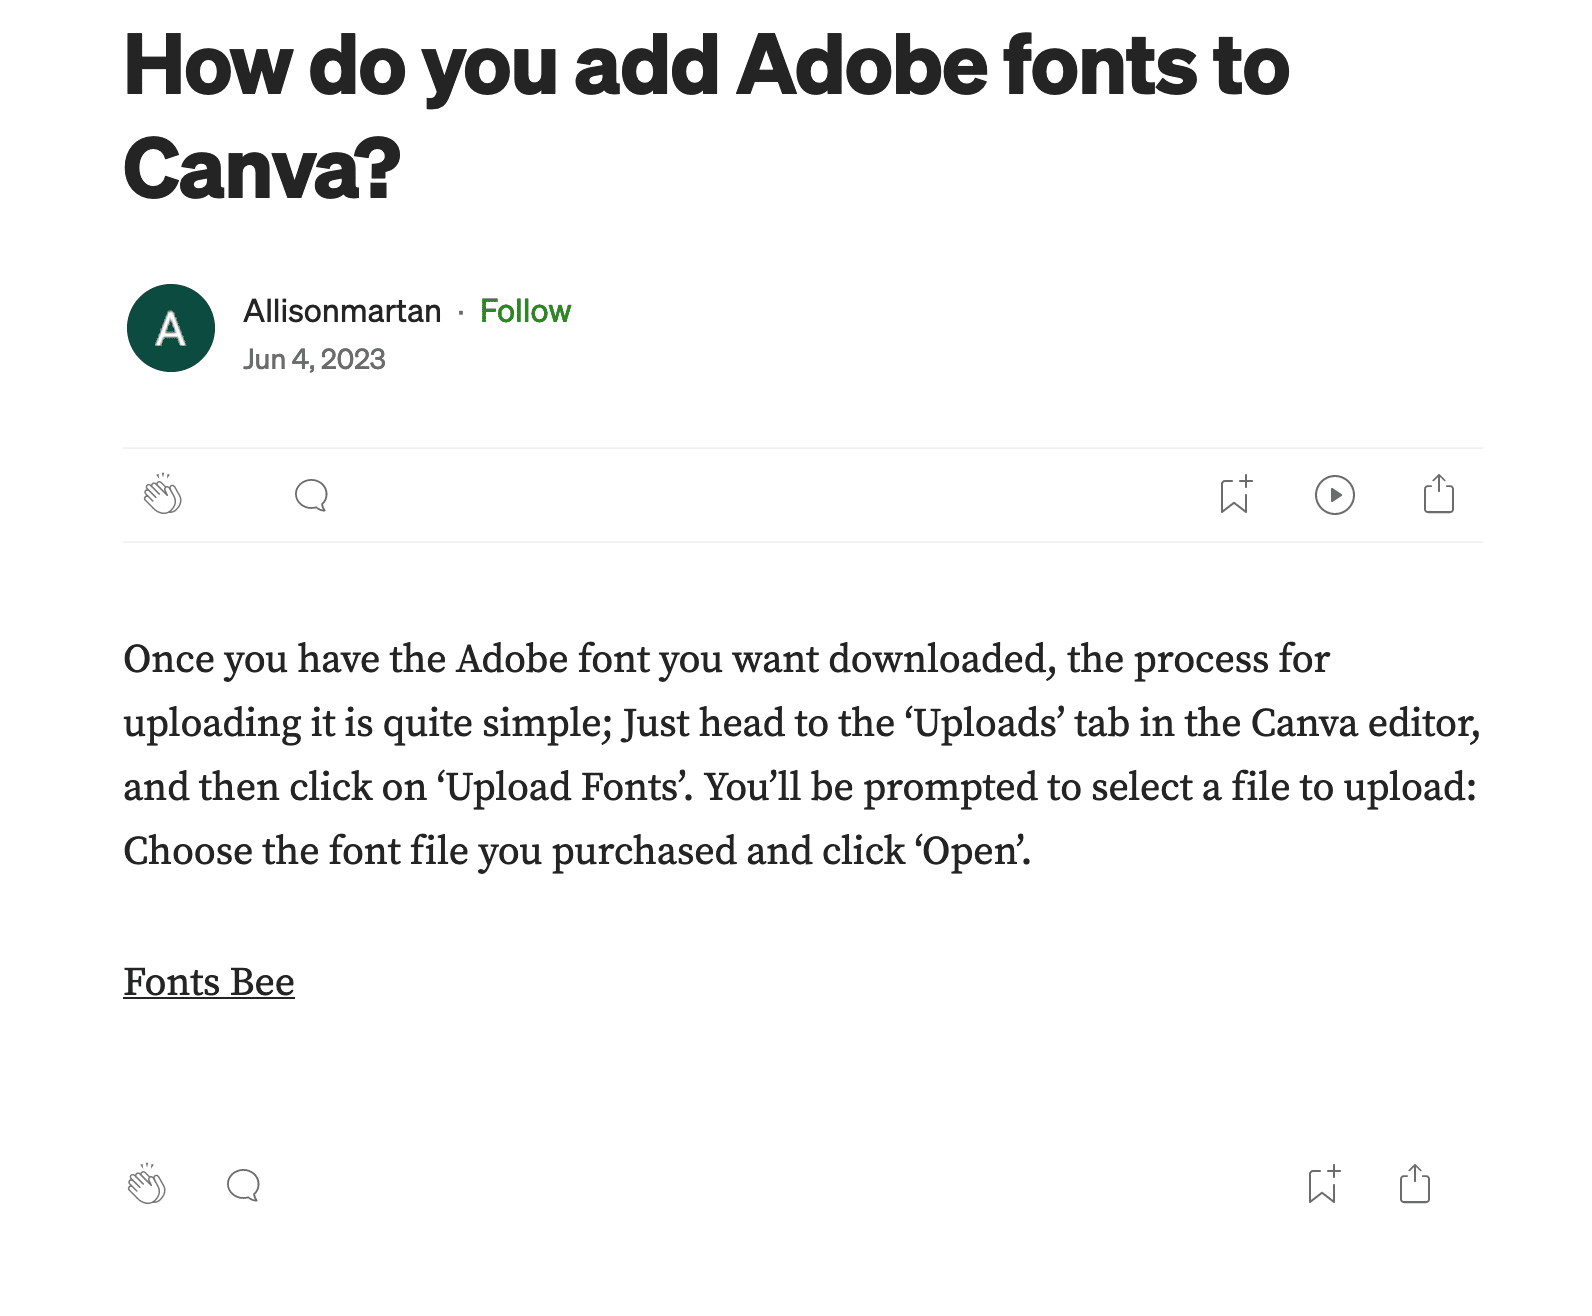 screenshot of how do add Adobe fonts to canva